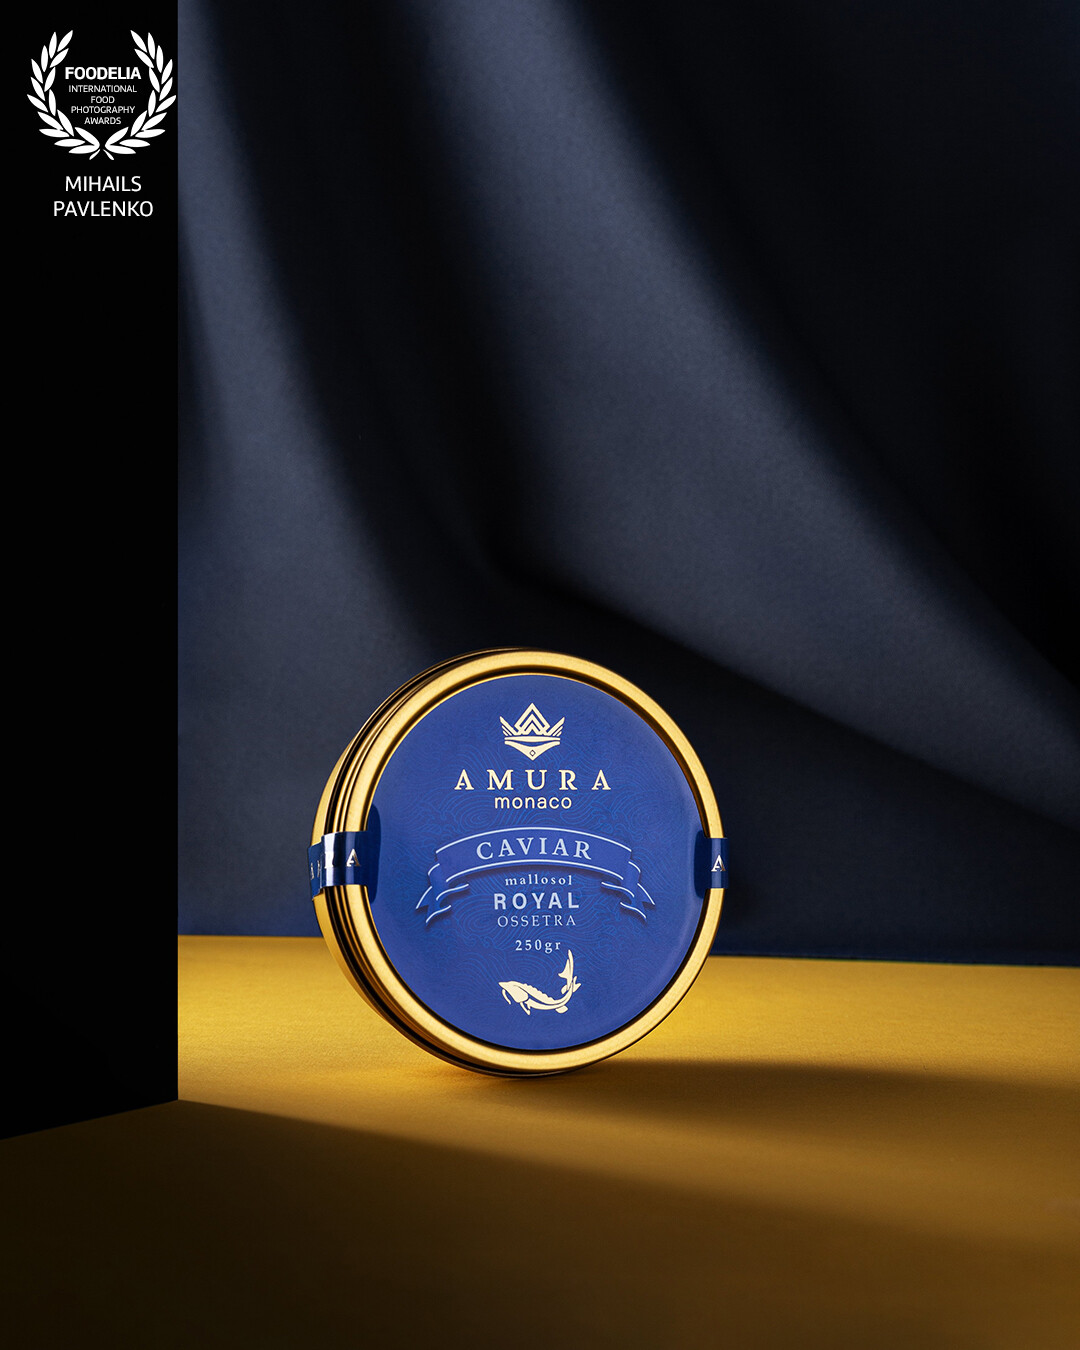 Experience the finest. Elevate your culinary game with this delicacy. Photo shoot of @amura_caviar product.